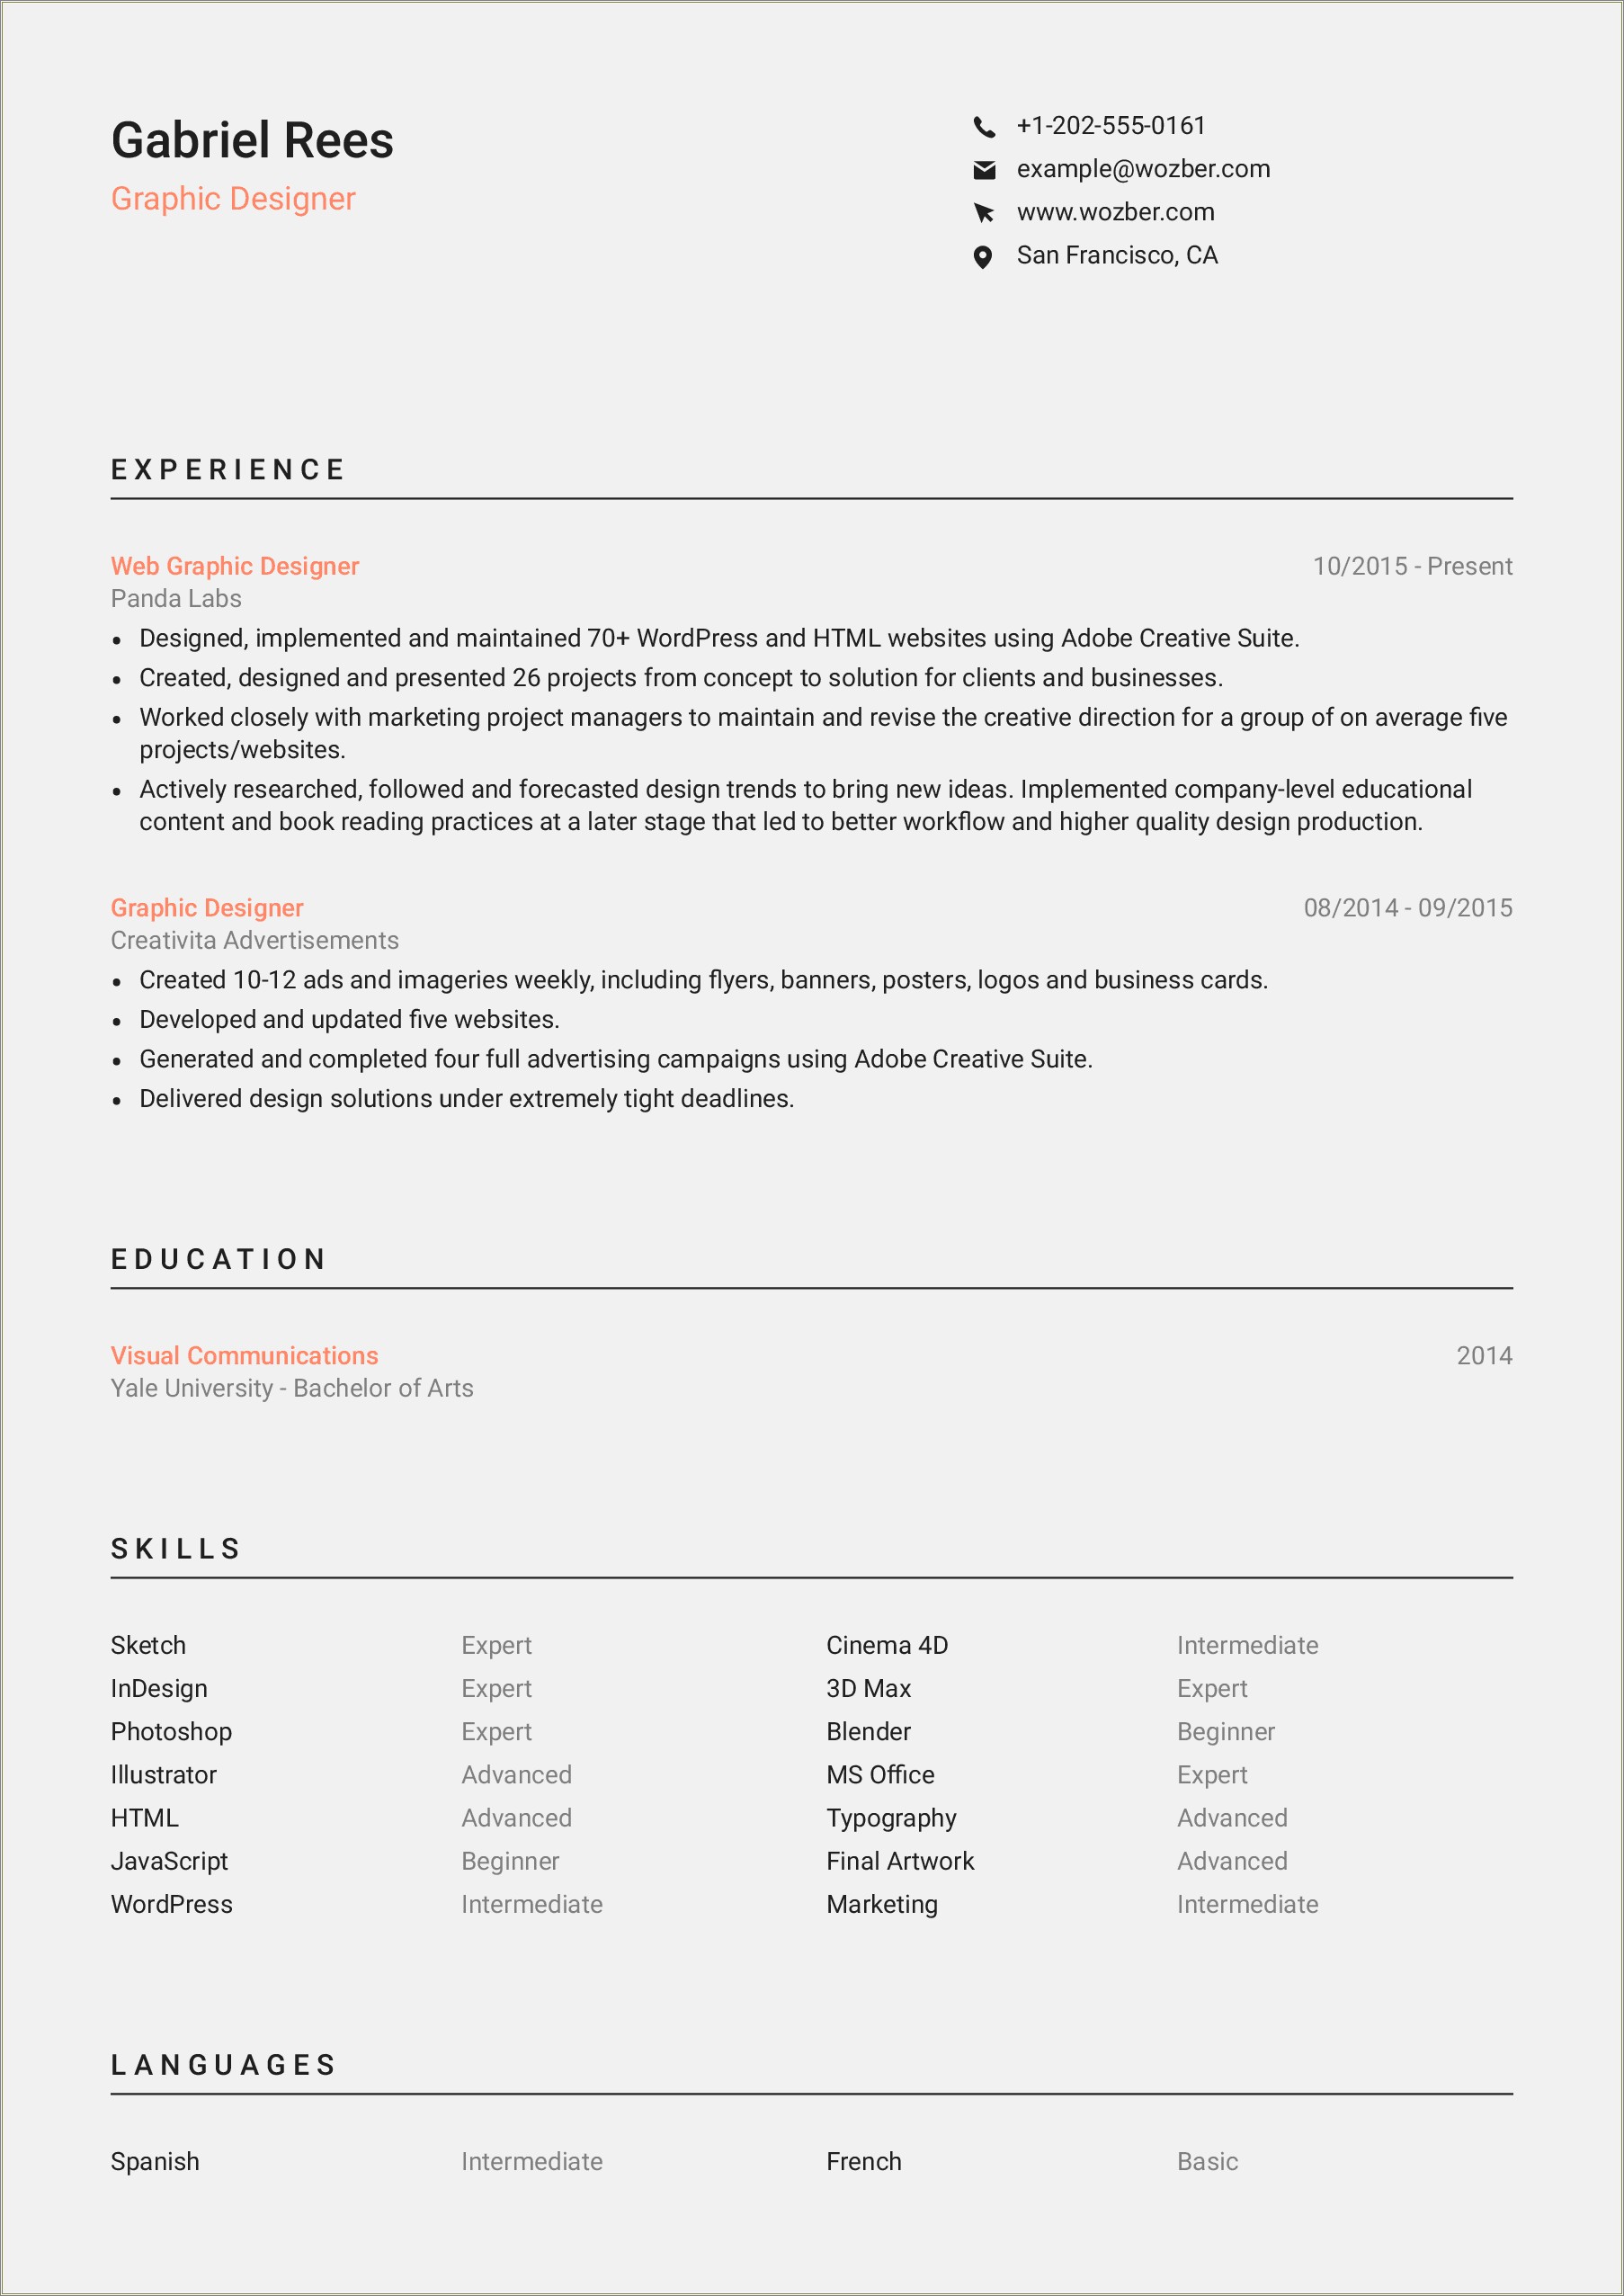 Resume To Show Advanced Skills In Office